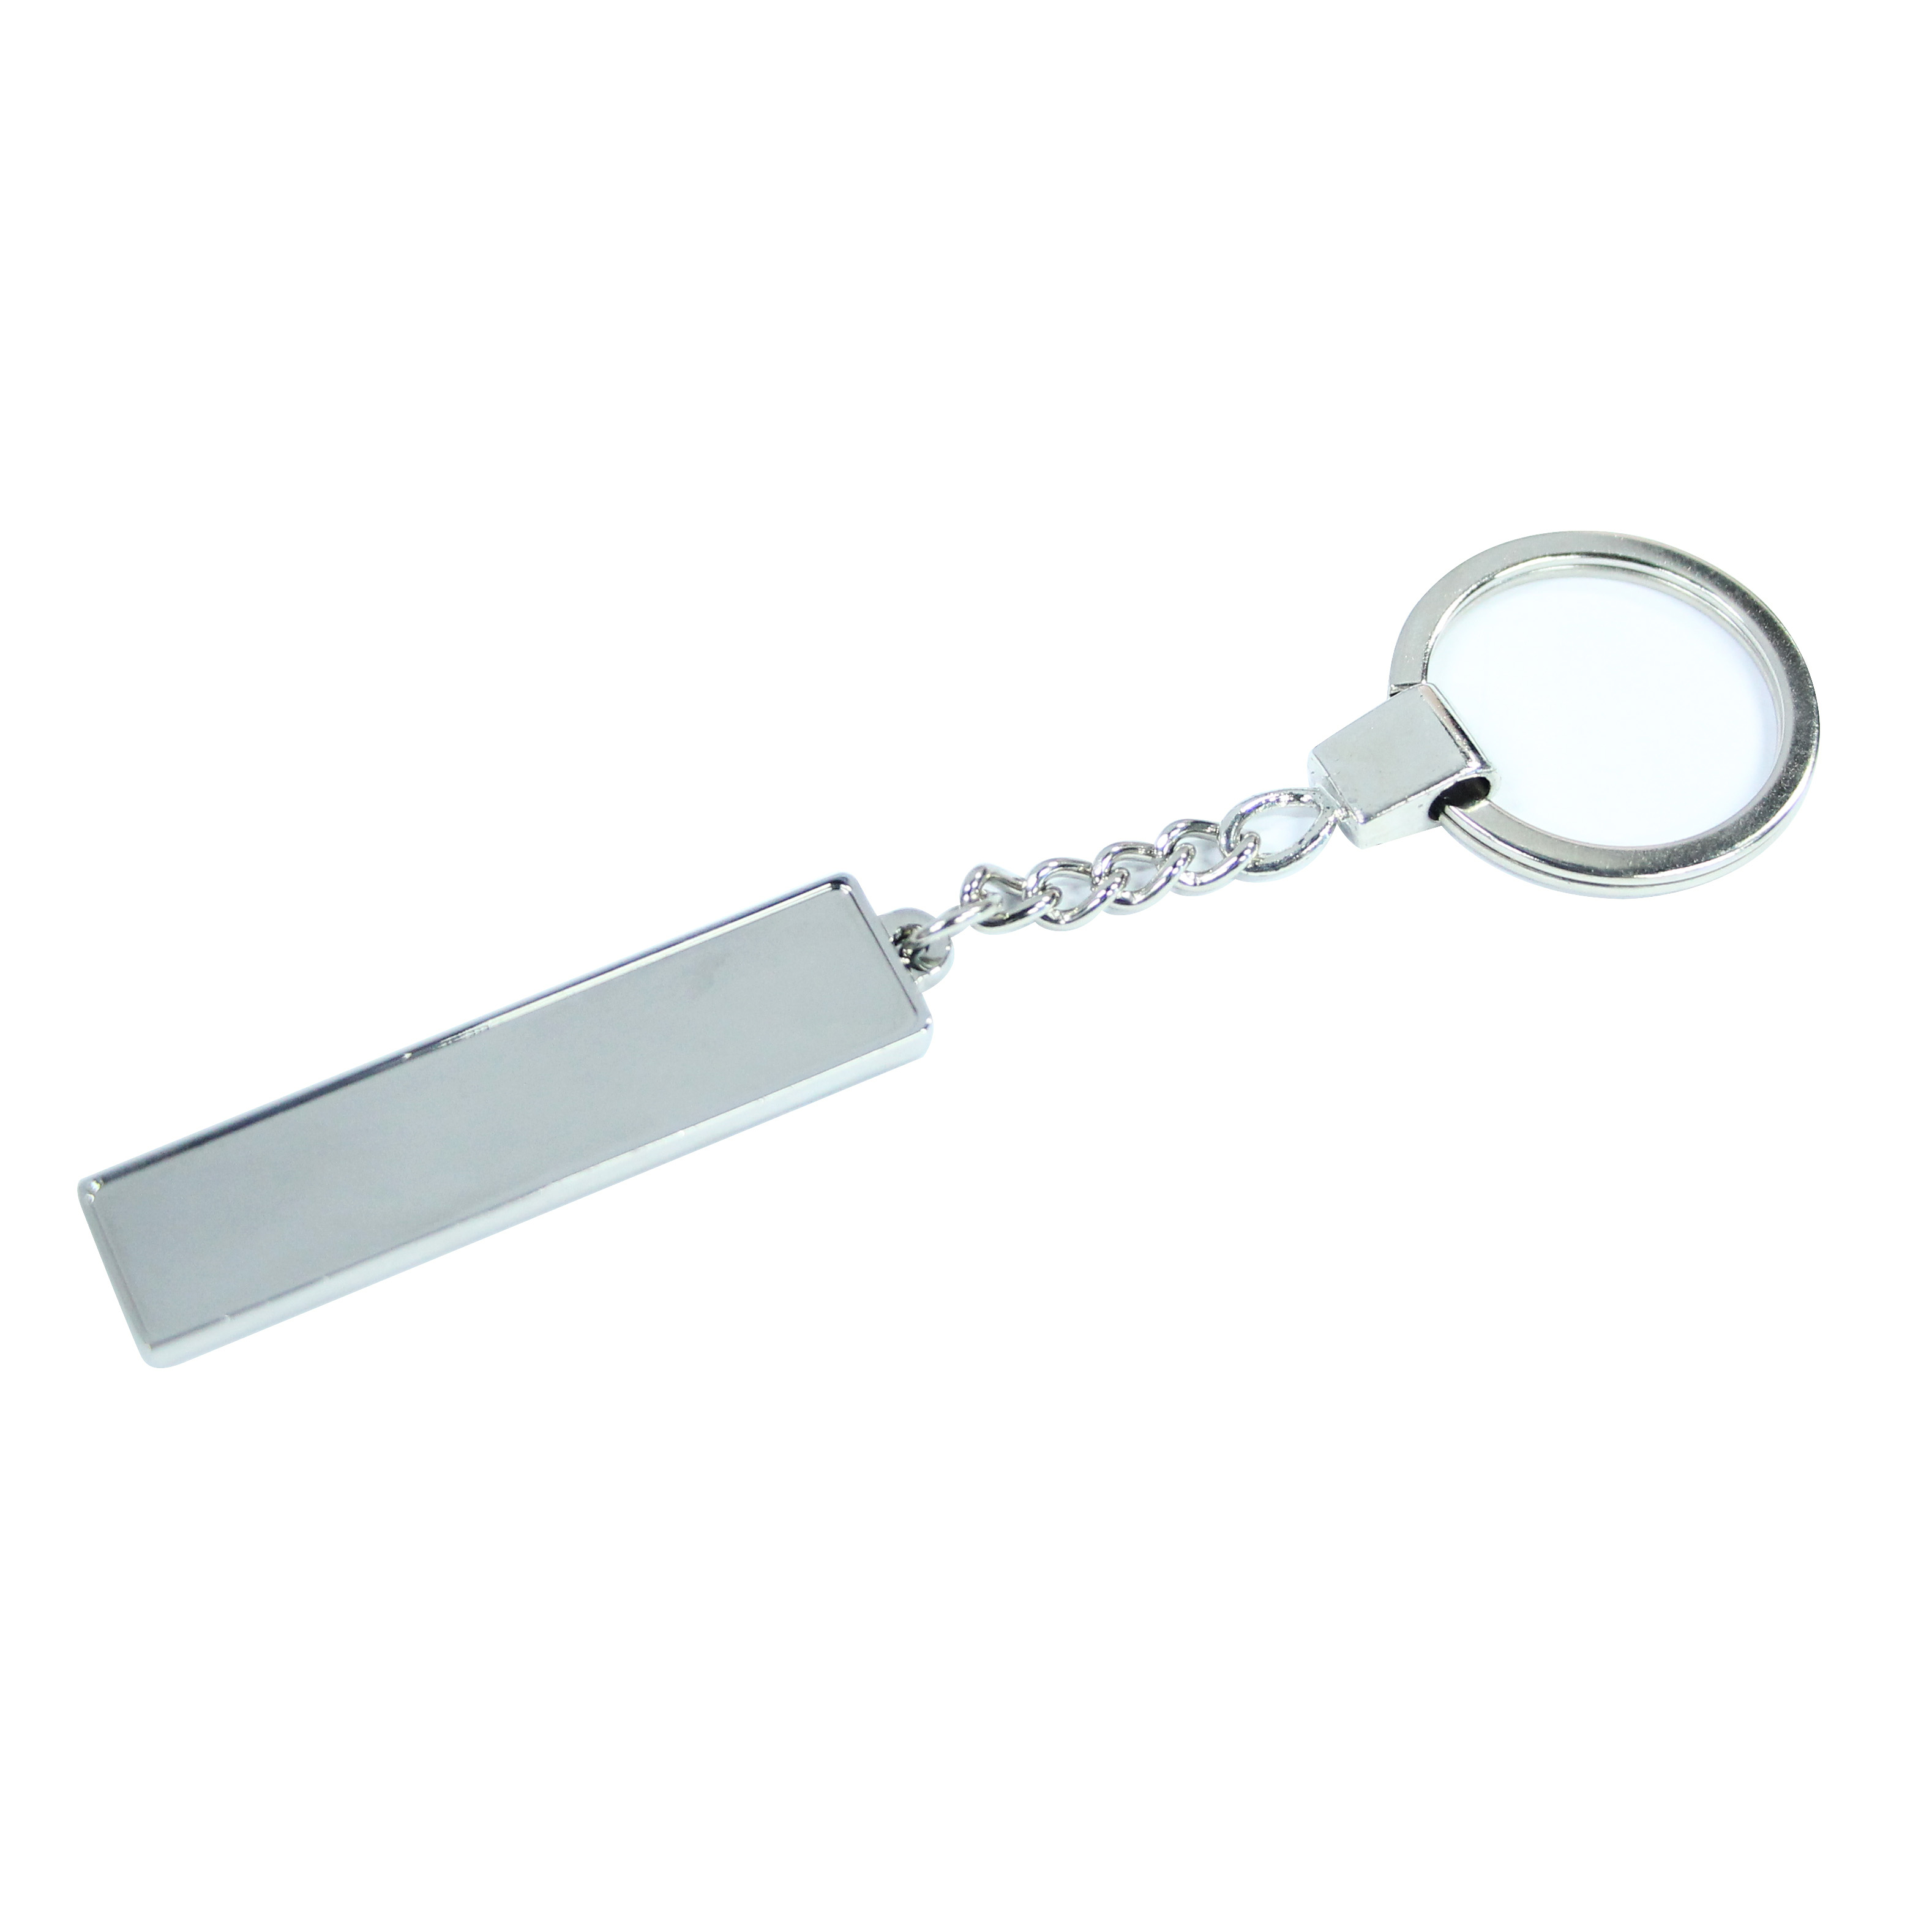 2022 New style car license number blank key ring